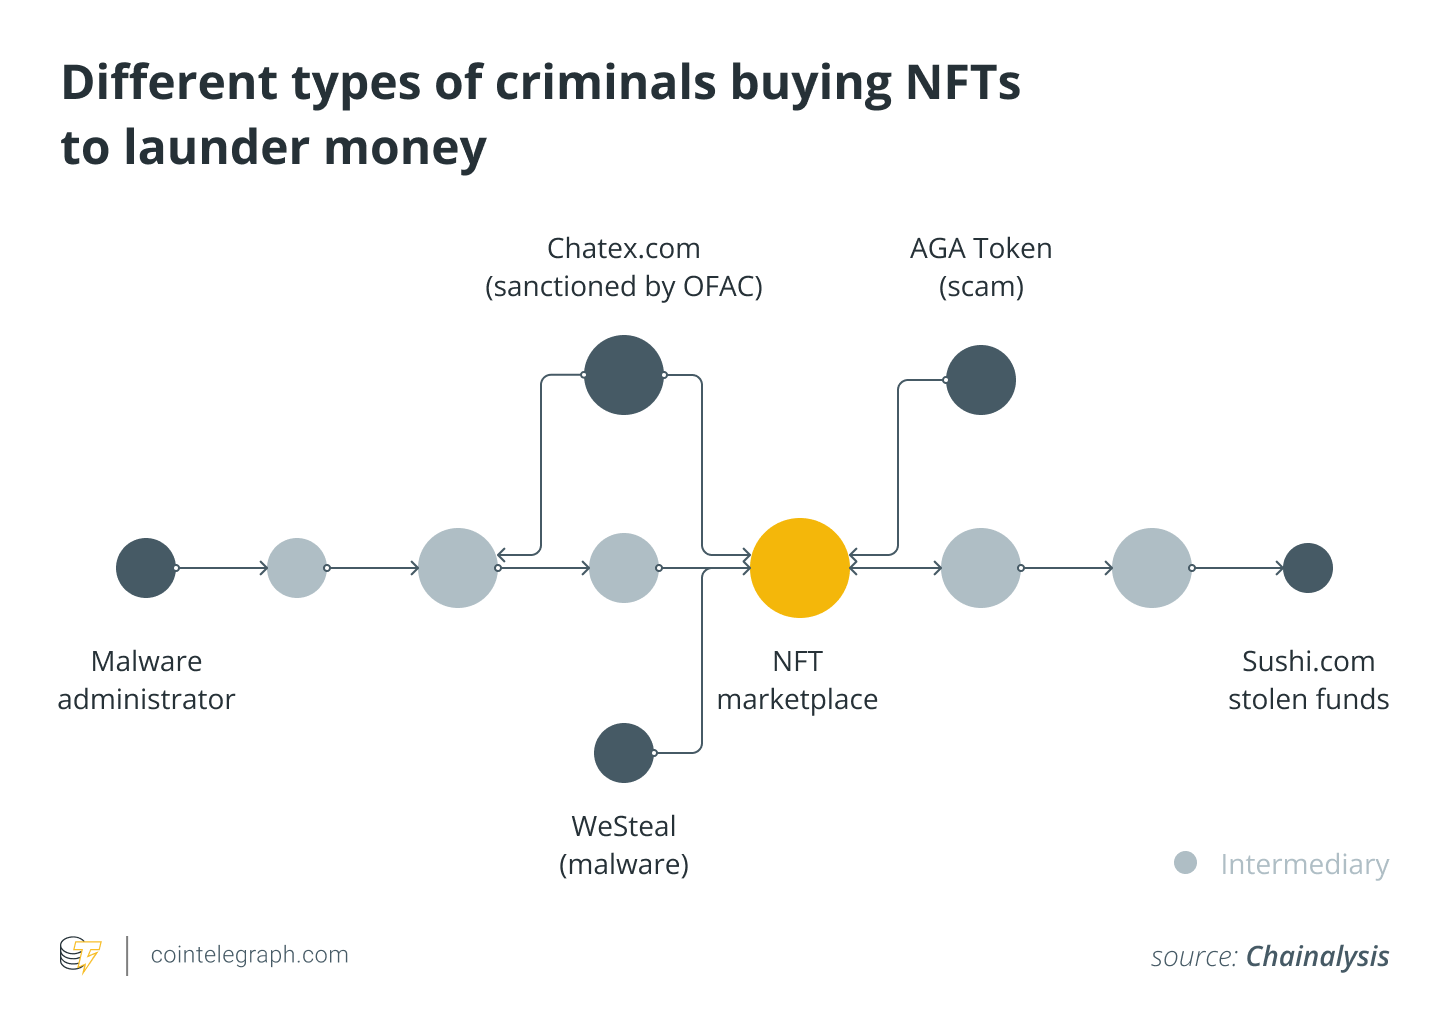 Different types of criminals buying NFTs to launder money